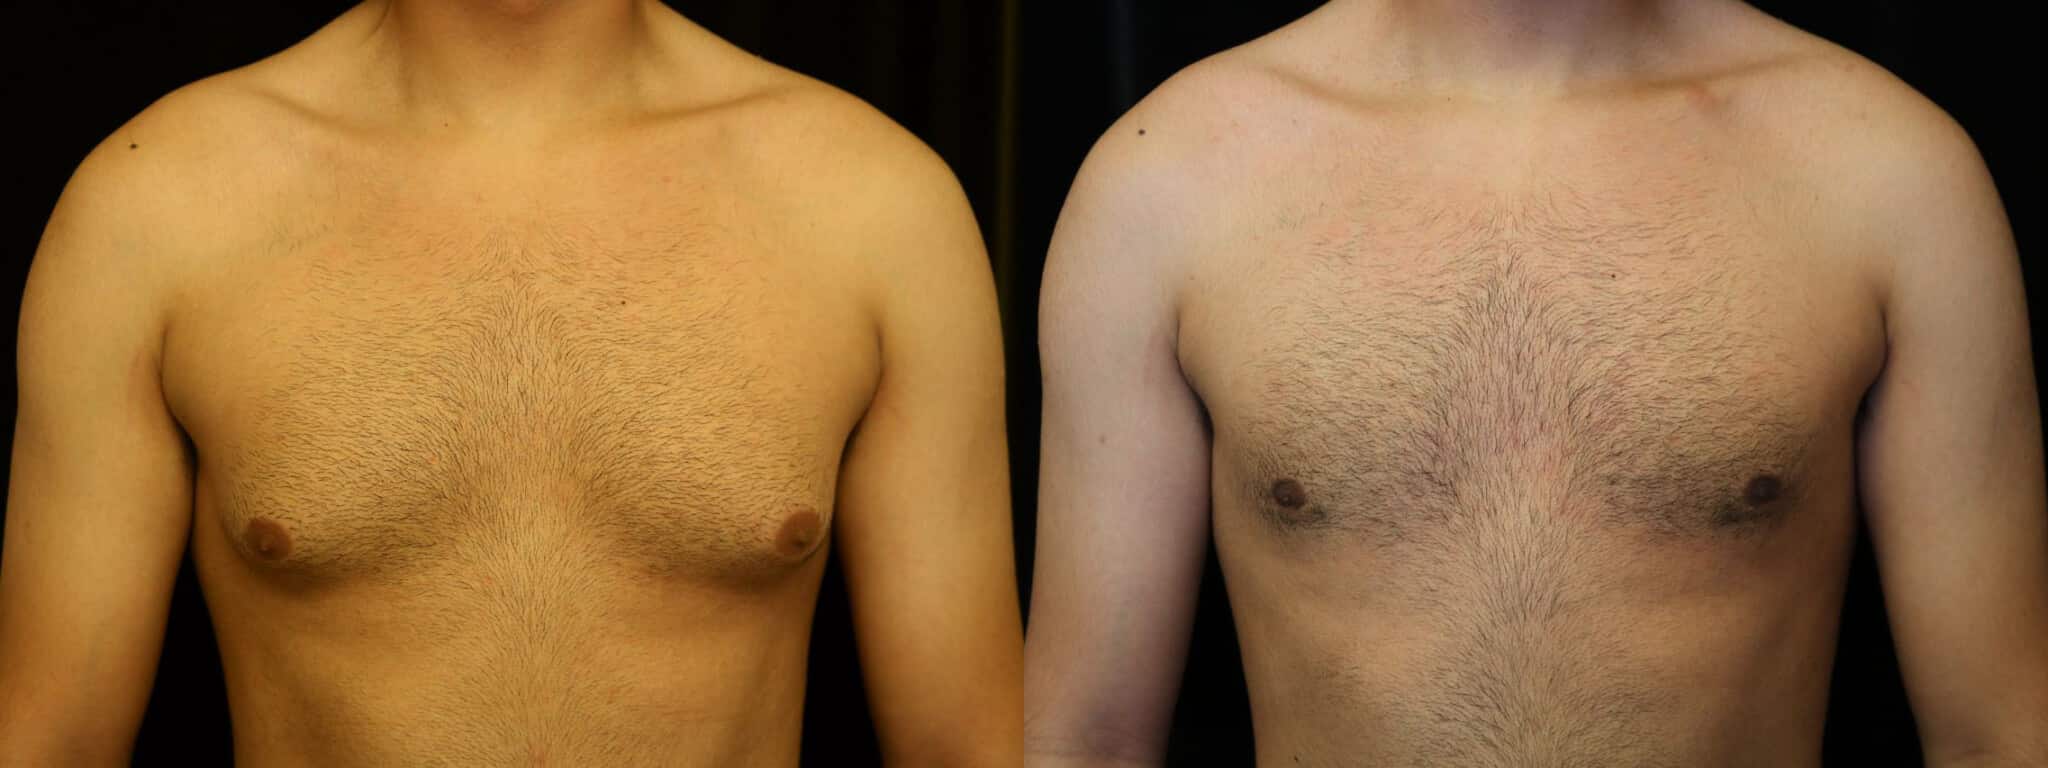 Gynecomastia Patient 13 Before & After